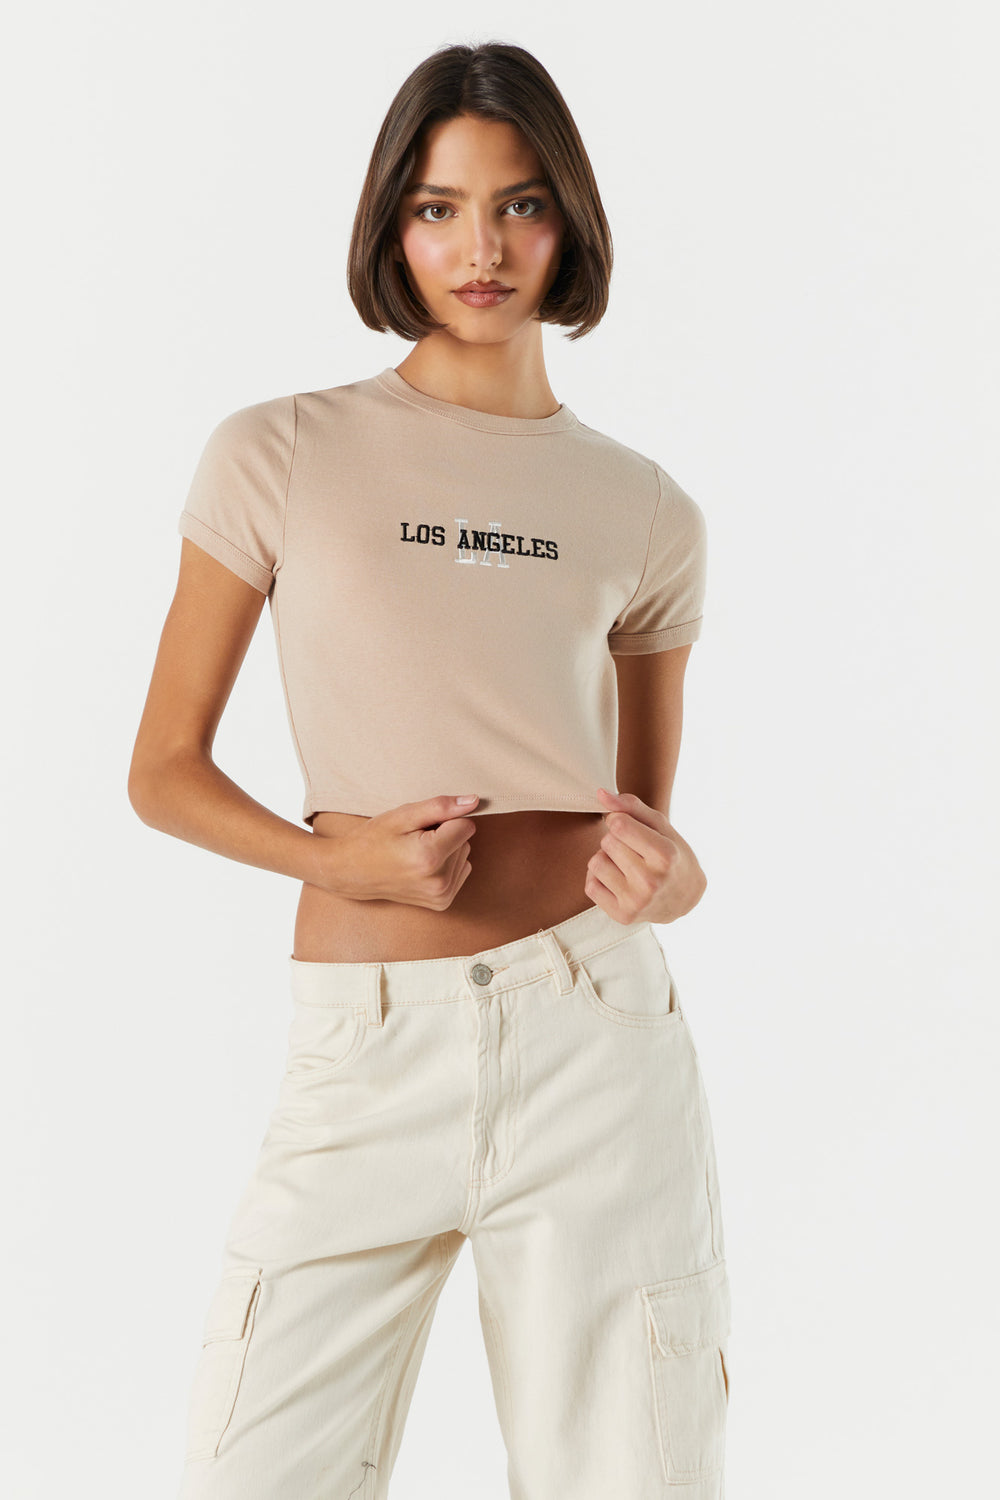 Los Angeles Graphic Baby Tee Los Angeles Graphic Baby Tee 1